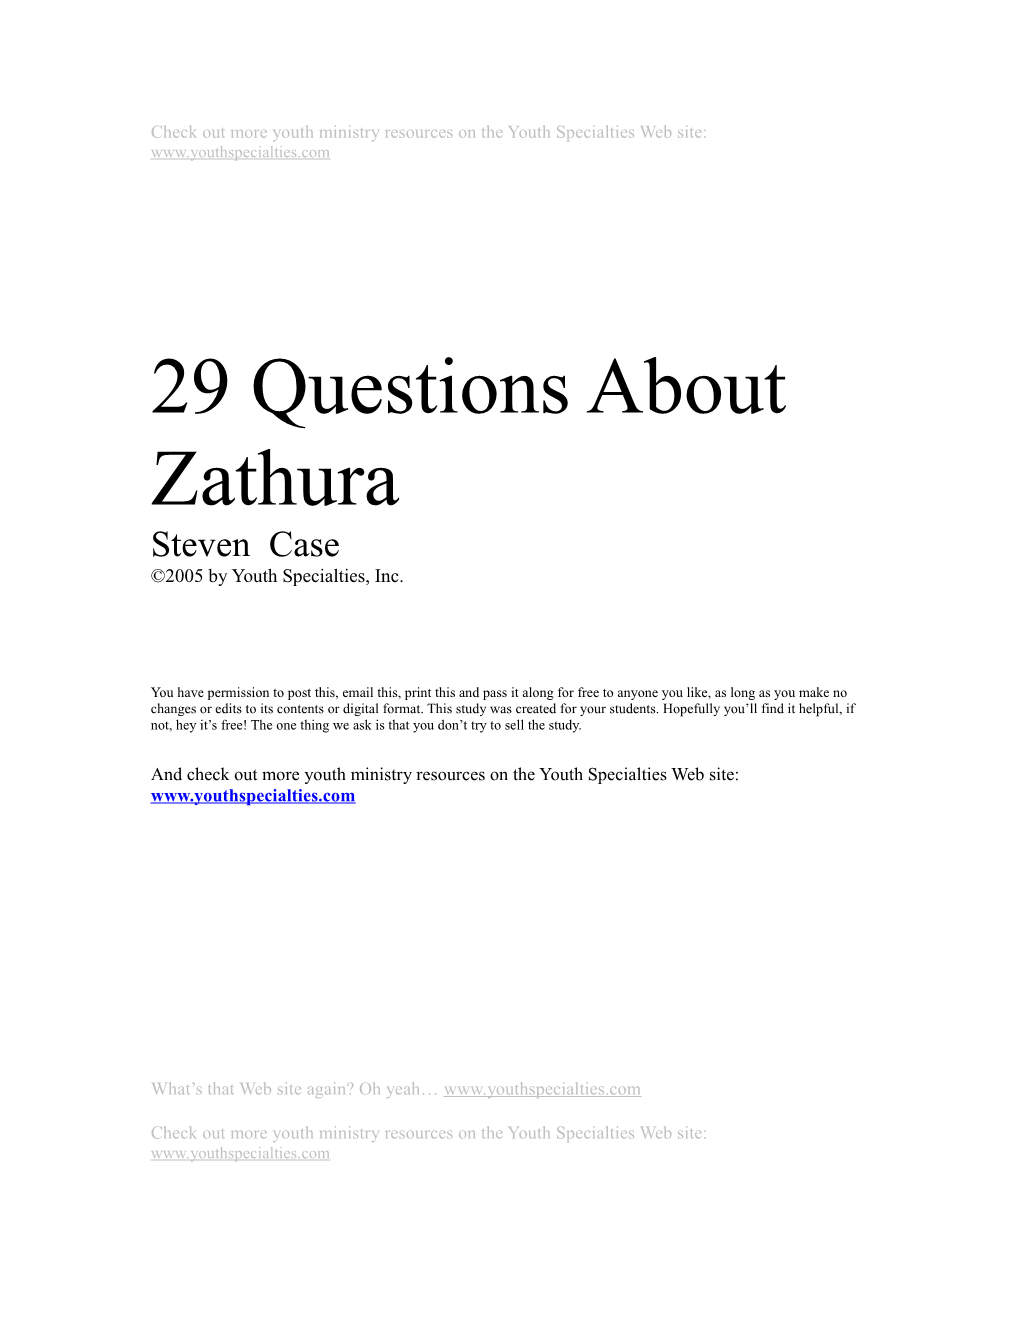 29 Questions About Zathura